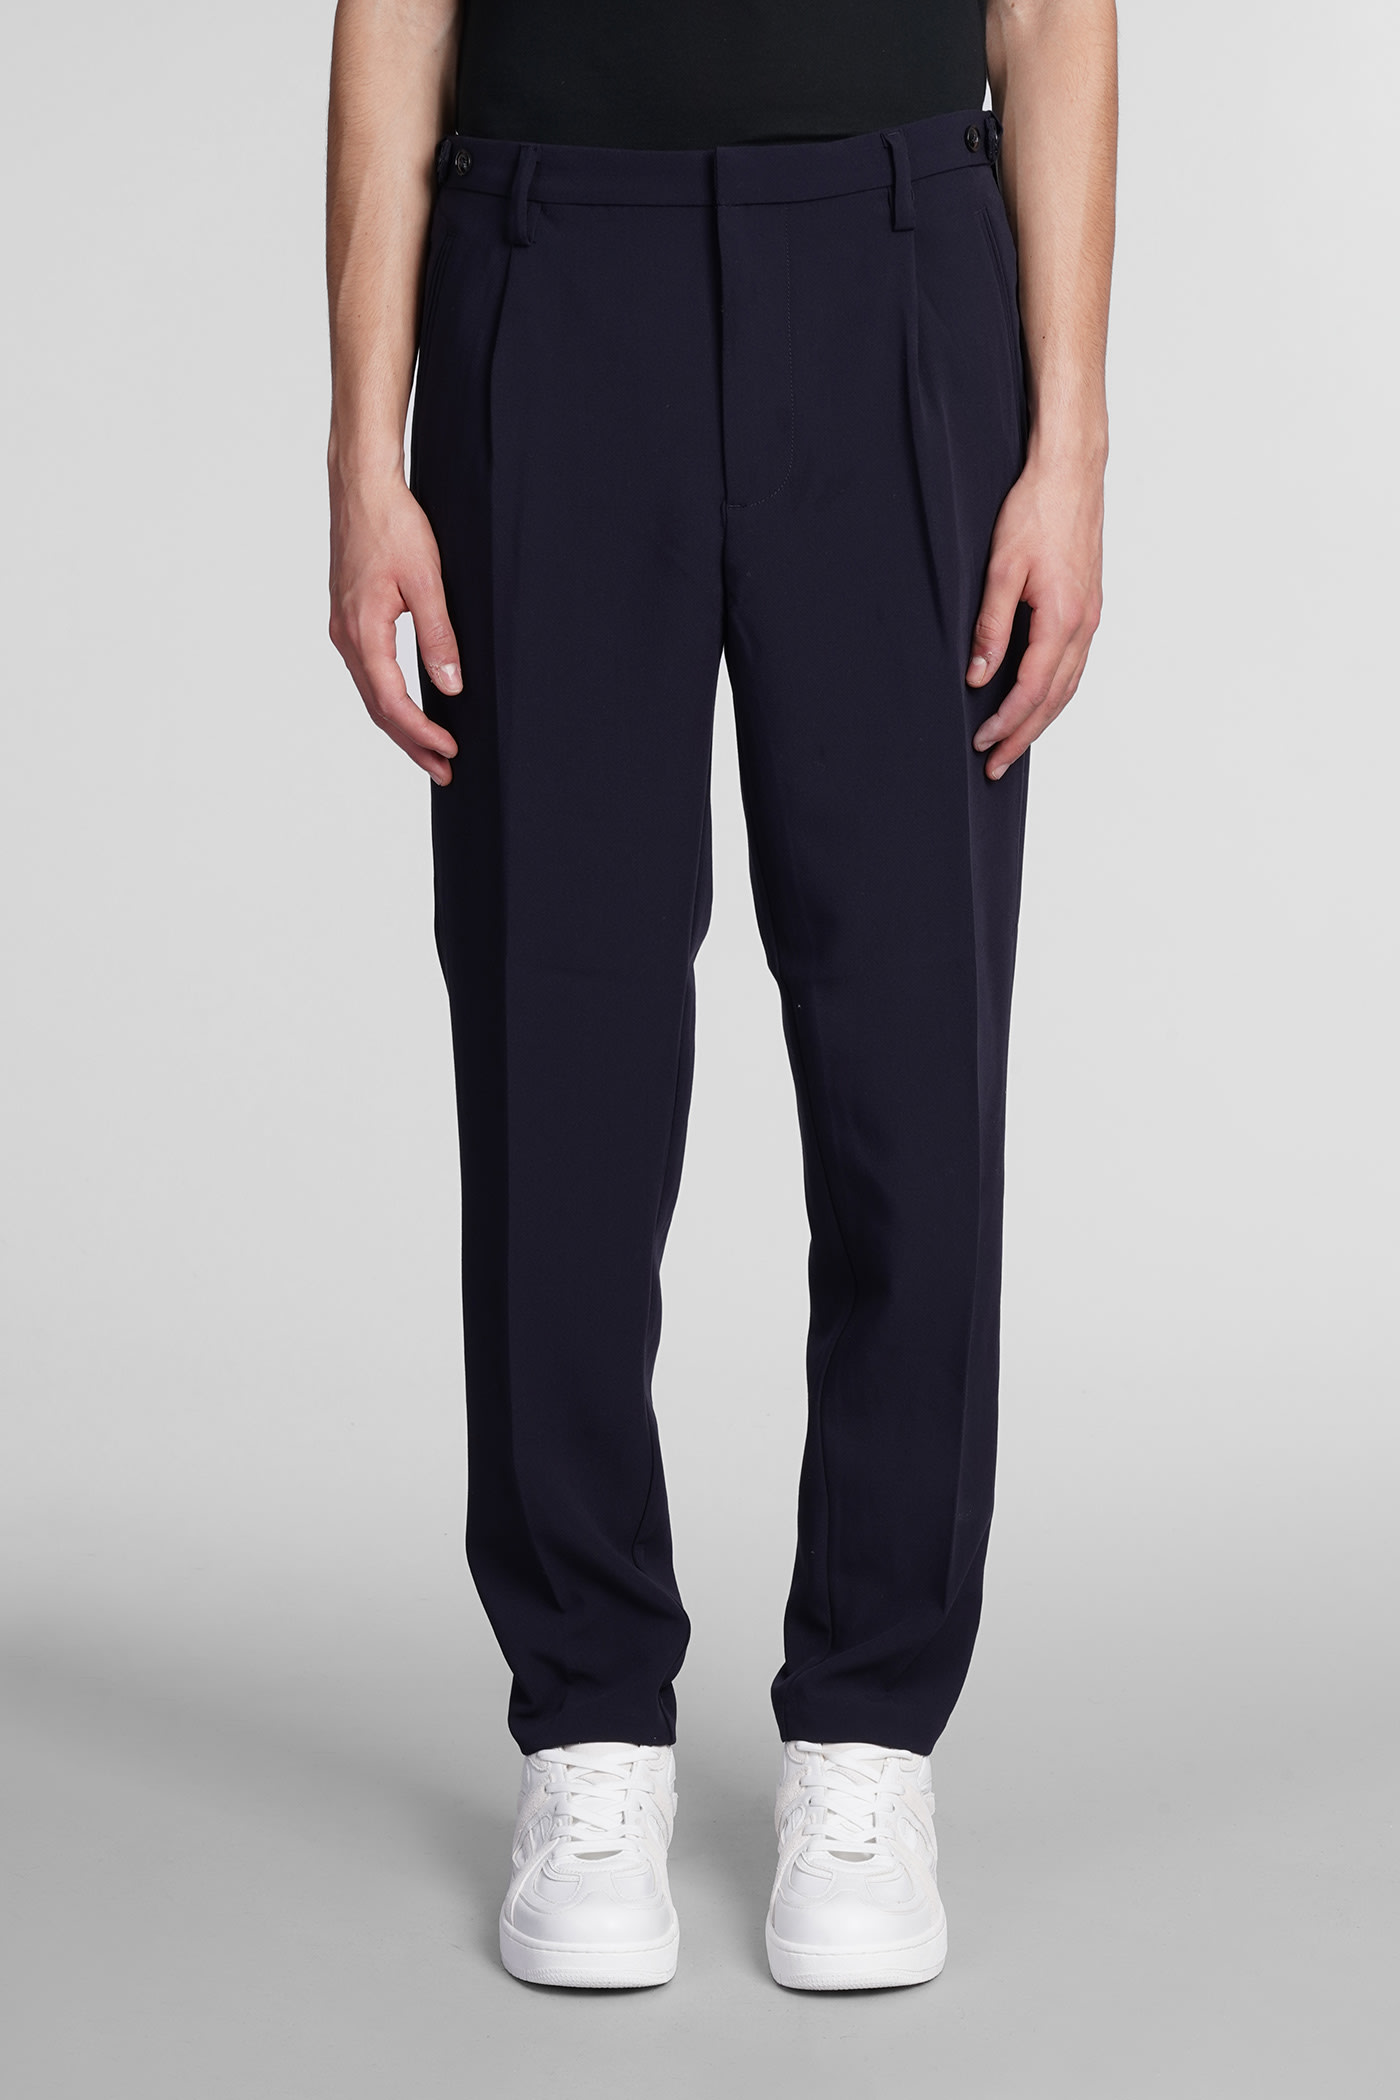 Emporio Armani Pants In Blue Wool